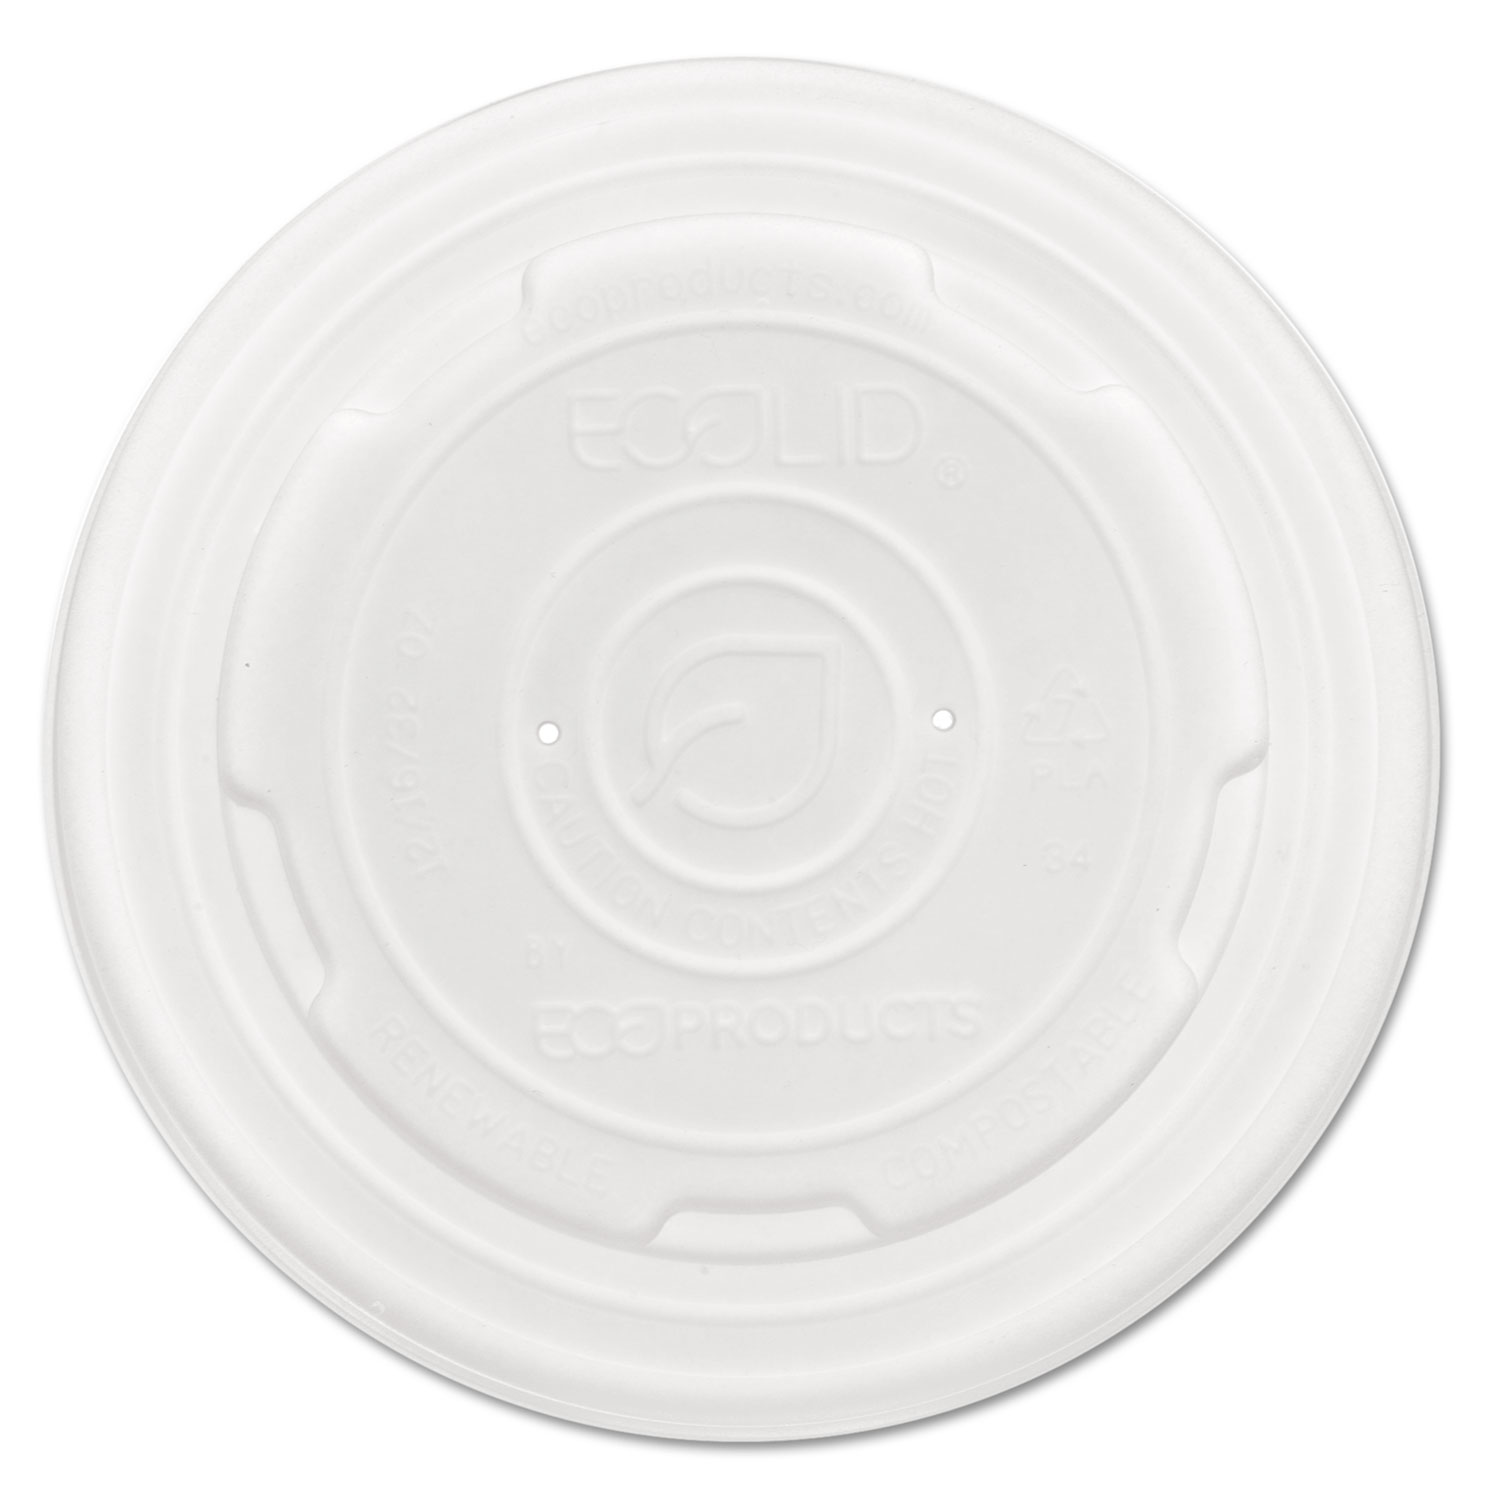  Eco-Products EP-ECOLID-SPL EcoLid Renew and Comp Food Container Lids for 12 oz, 16 oz, 32 oz, 50/Pack, 10 Packs/Carton (ECOEPECOLIDSPL) 